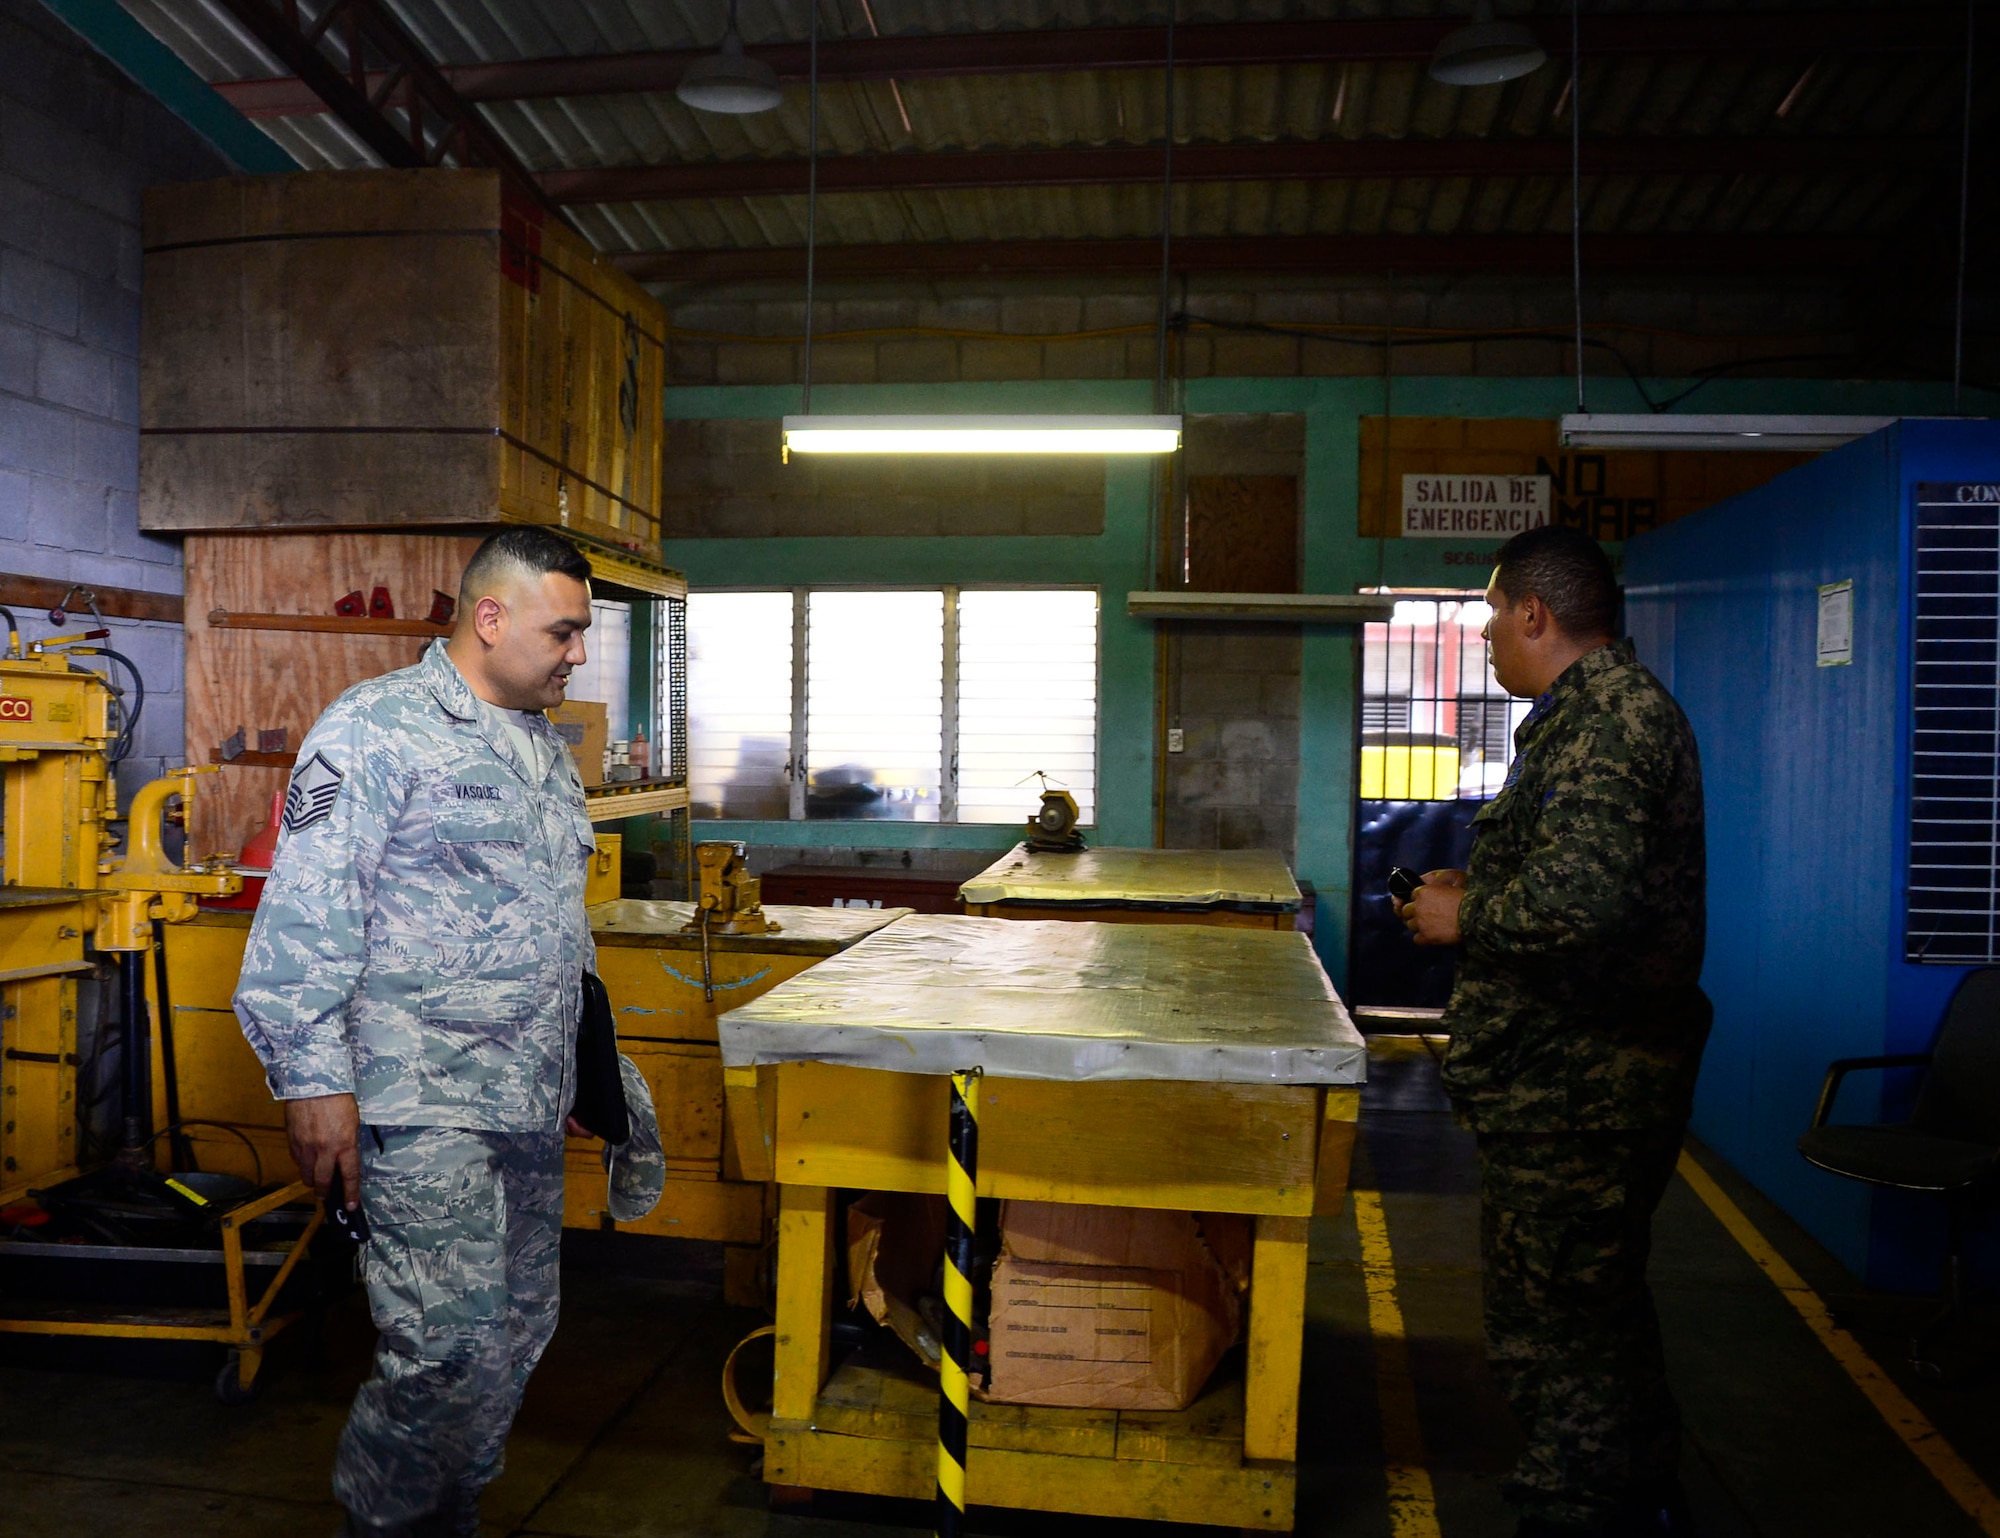 U.S. Air Force Master Sgt. Roberto Vasquez, superintendent of 12th Air Force (Air Forces Southern) Plans, Requirements, and Programs section, discusses the maintenance needs of the Honduran Air Force with Honduran Air Force Sgt. Marcotulio Avila, maintenance chief, stationed at Soto Cano Air Base in Comayagua, Honduras, June 17, 2015. A five-member assessment team from 12th AF (AFSOUTH), Davis-Monthan Air Force Base, Ariz., and the 571st Mobility Support Advisory Squadron from Travis Air Force Base, Cali., focused on the communication, intelligence collection and analysis, and  maintenance capabilities at Hernan Acosta Mejia Air Base, Soto Cano Air Base, Armand Escalon Espinal Air Base and Hector Caraccioli Moncada Air Base. (U.S. Air Force photo by Tech. Sgt. Heather R. Redman/Released)